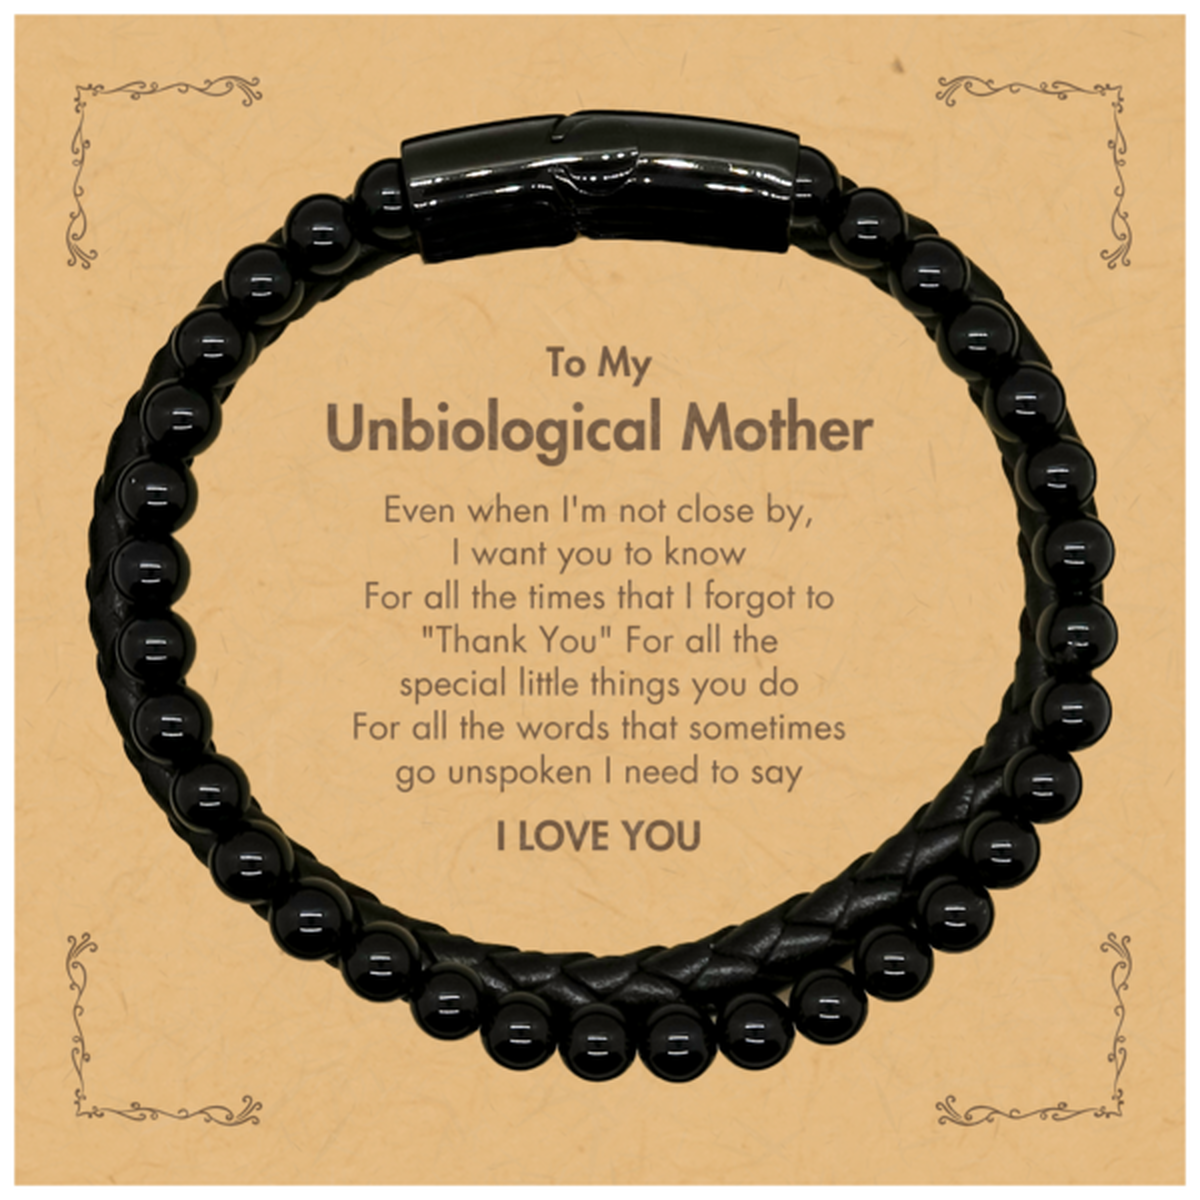 Thank You Gifts for Unbiological Mother, Keepsake Stone Leather Bracelets Gifts for Unbiological Mother Birthday Mother's day Father's Day Unbiological Mother For all the words That sometimes go unspoken I need to say I LOVE YOU